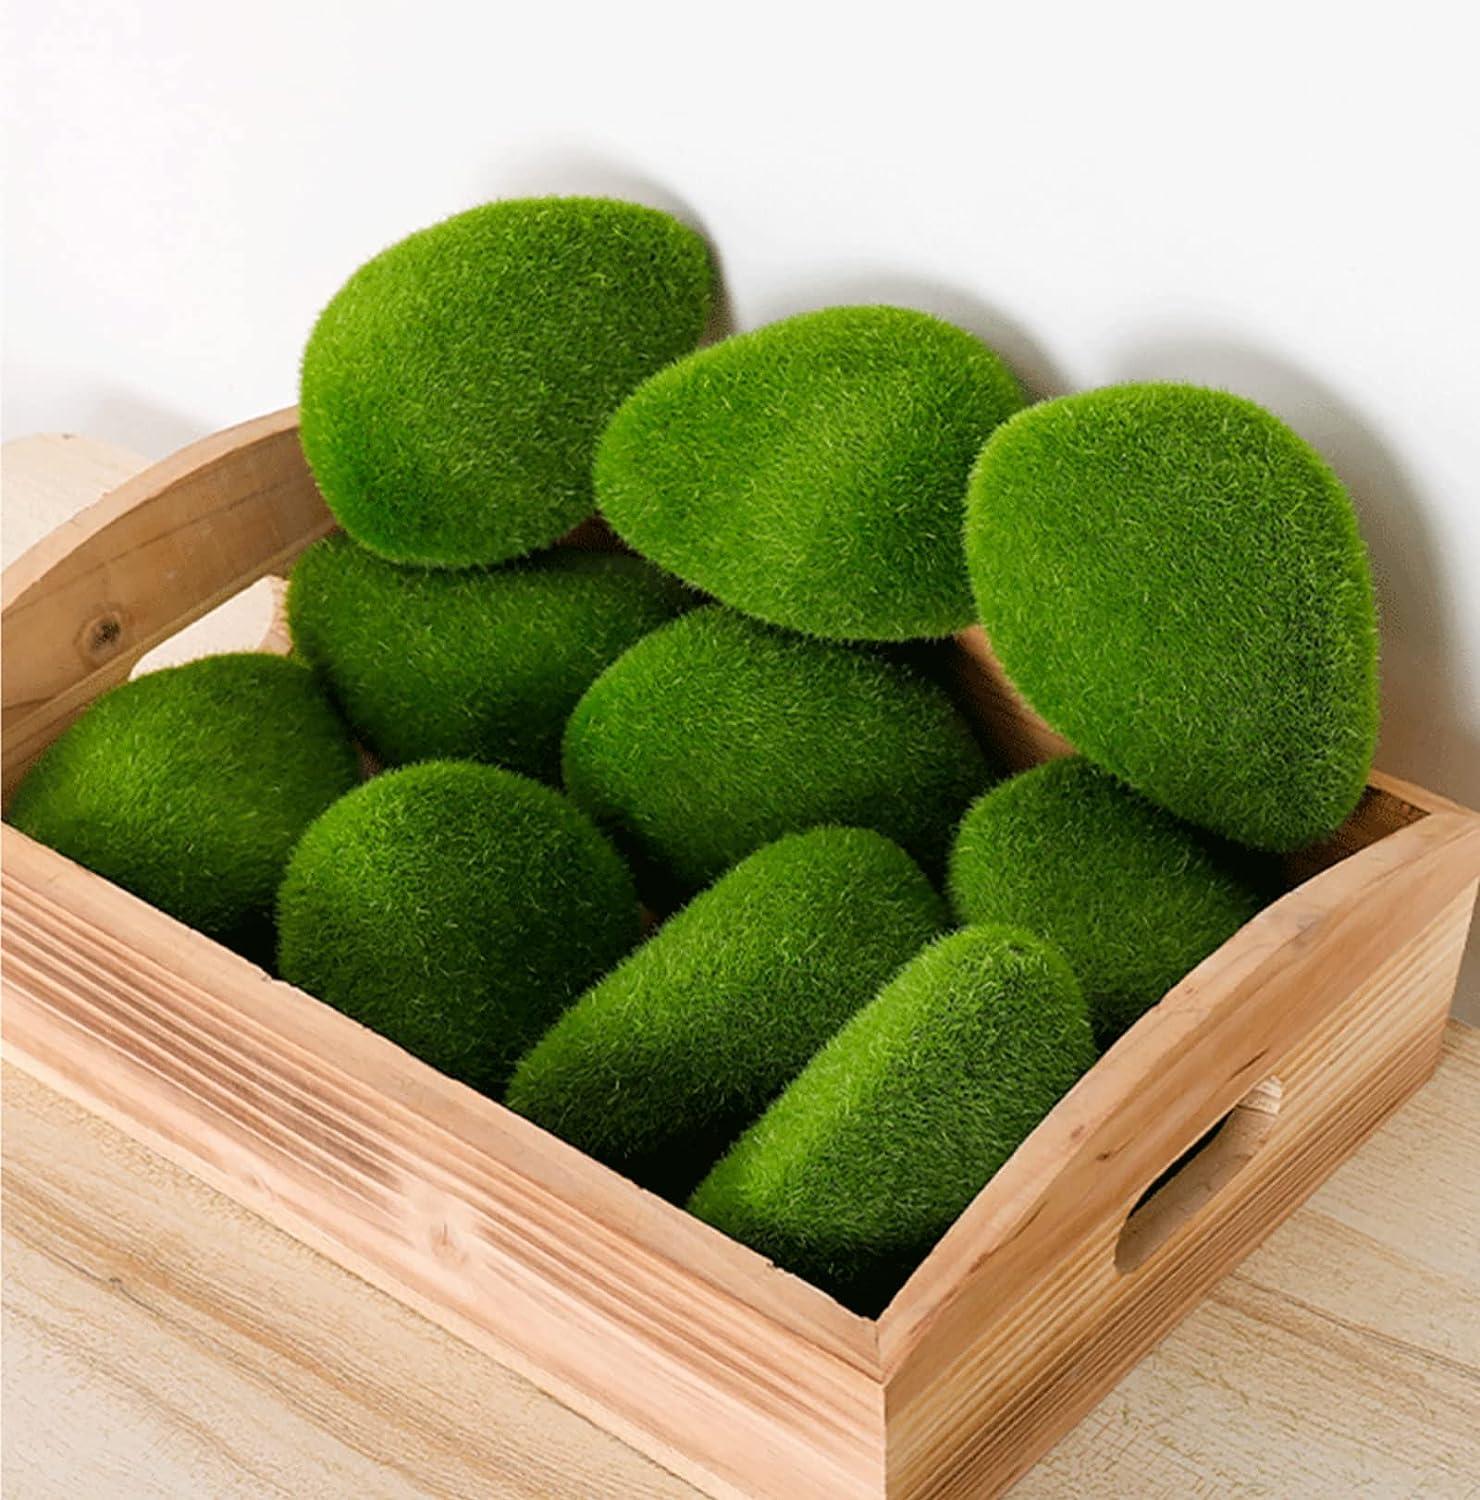 50 Pcs 5 Size Artificial Moss Rocks Decorative Faux Green Moss Covered  Stones Fake Moss Balls for Garden Decor DIY Floral Arrangements Plant Poted